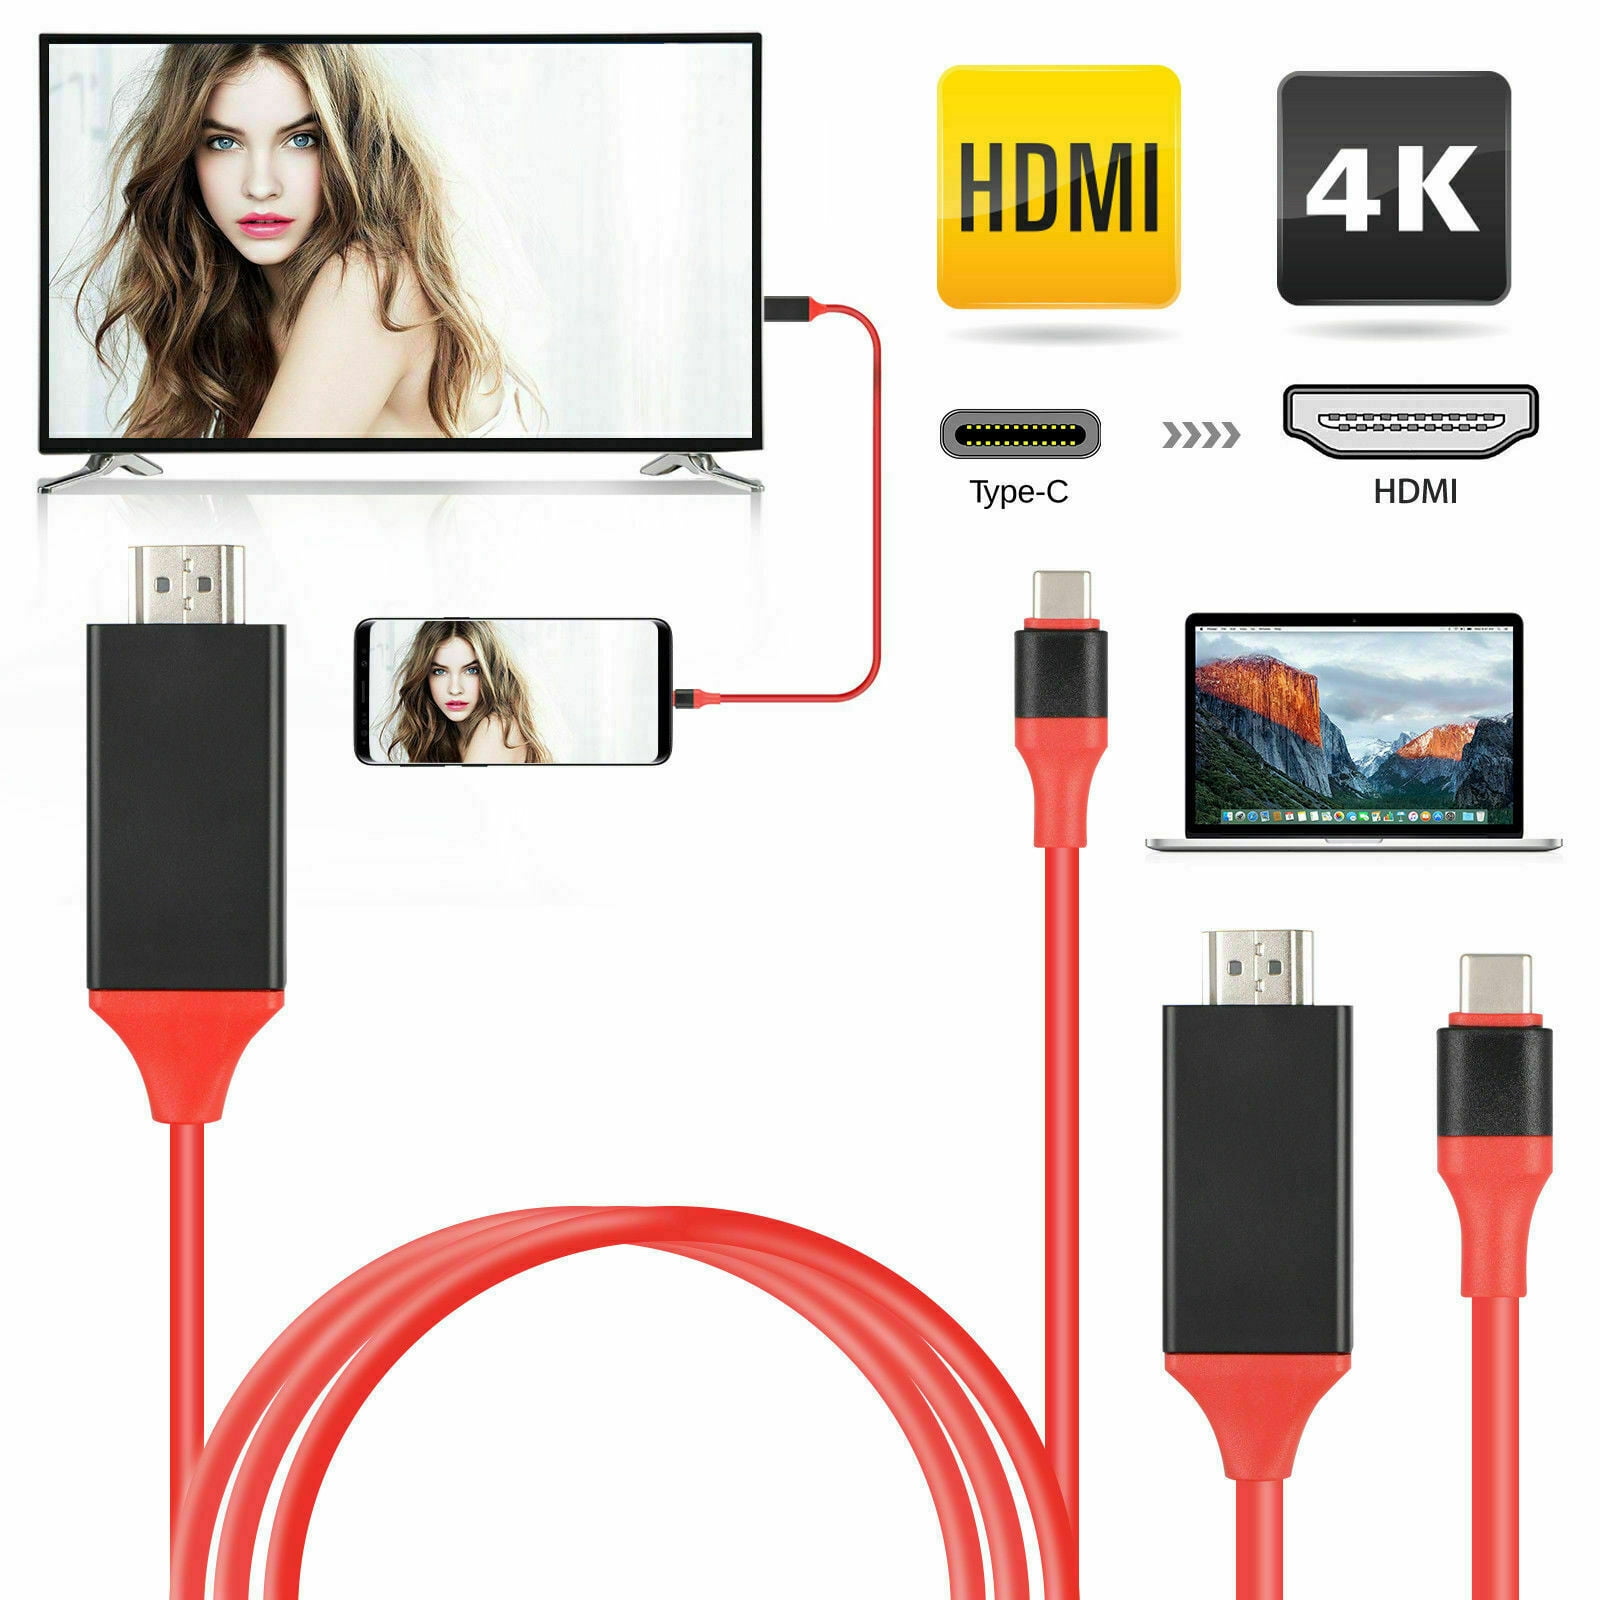 Panorama Transportere illoyalitet USB C Type C to HDMI HDTV AV TV Cable Adapter For Samsung Galaxy  S10/S10E/S9/S9 Plus/Note 9/8/S8 Active/Plus, MacBook iPad Air iPad Pro LG  G7/G6/V40, Oneplus 6T/6/5 - Walmart.com